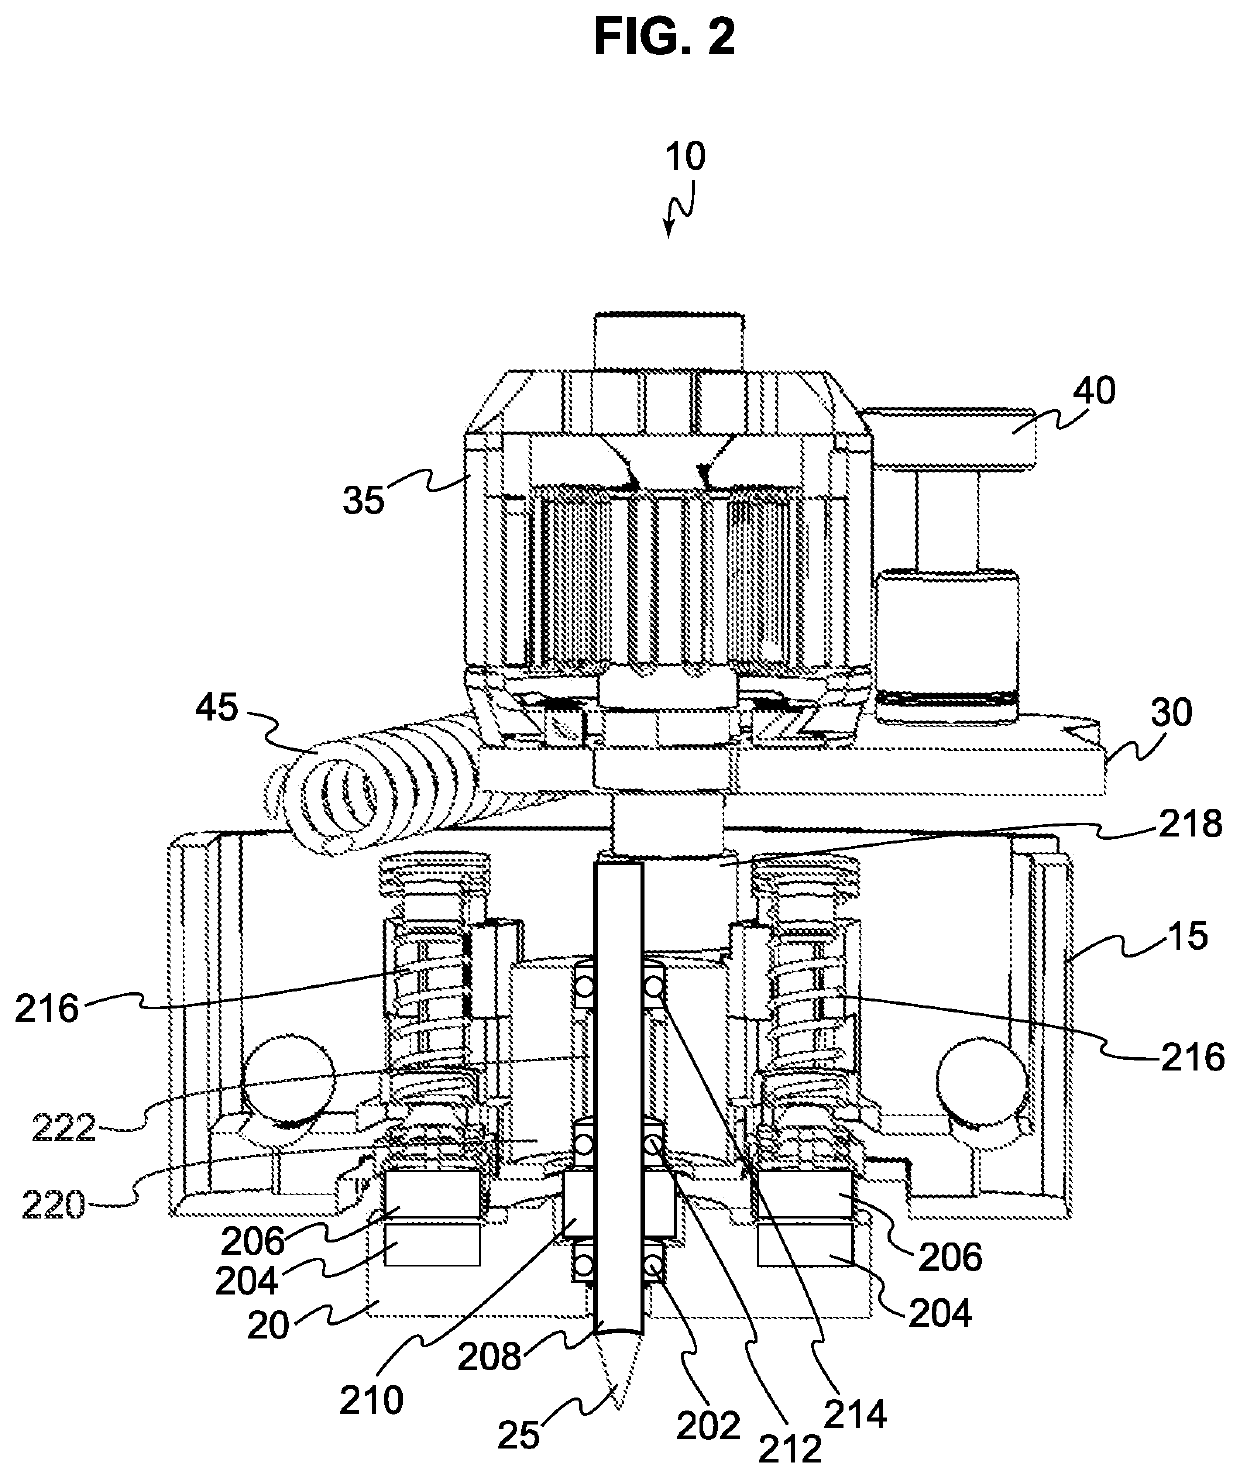 High-speed, low runout spindle assembly